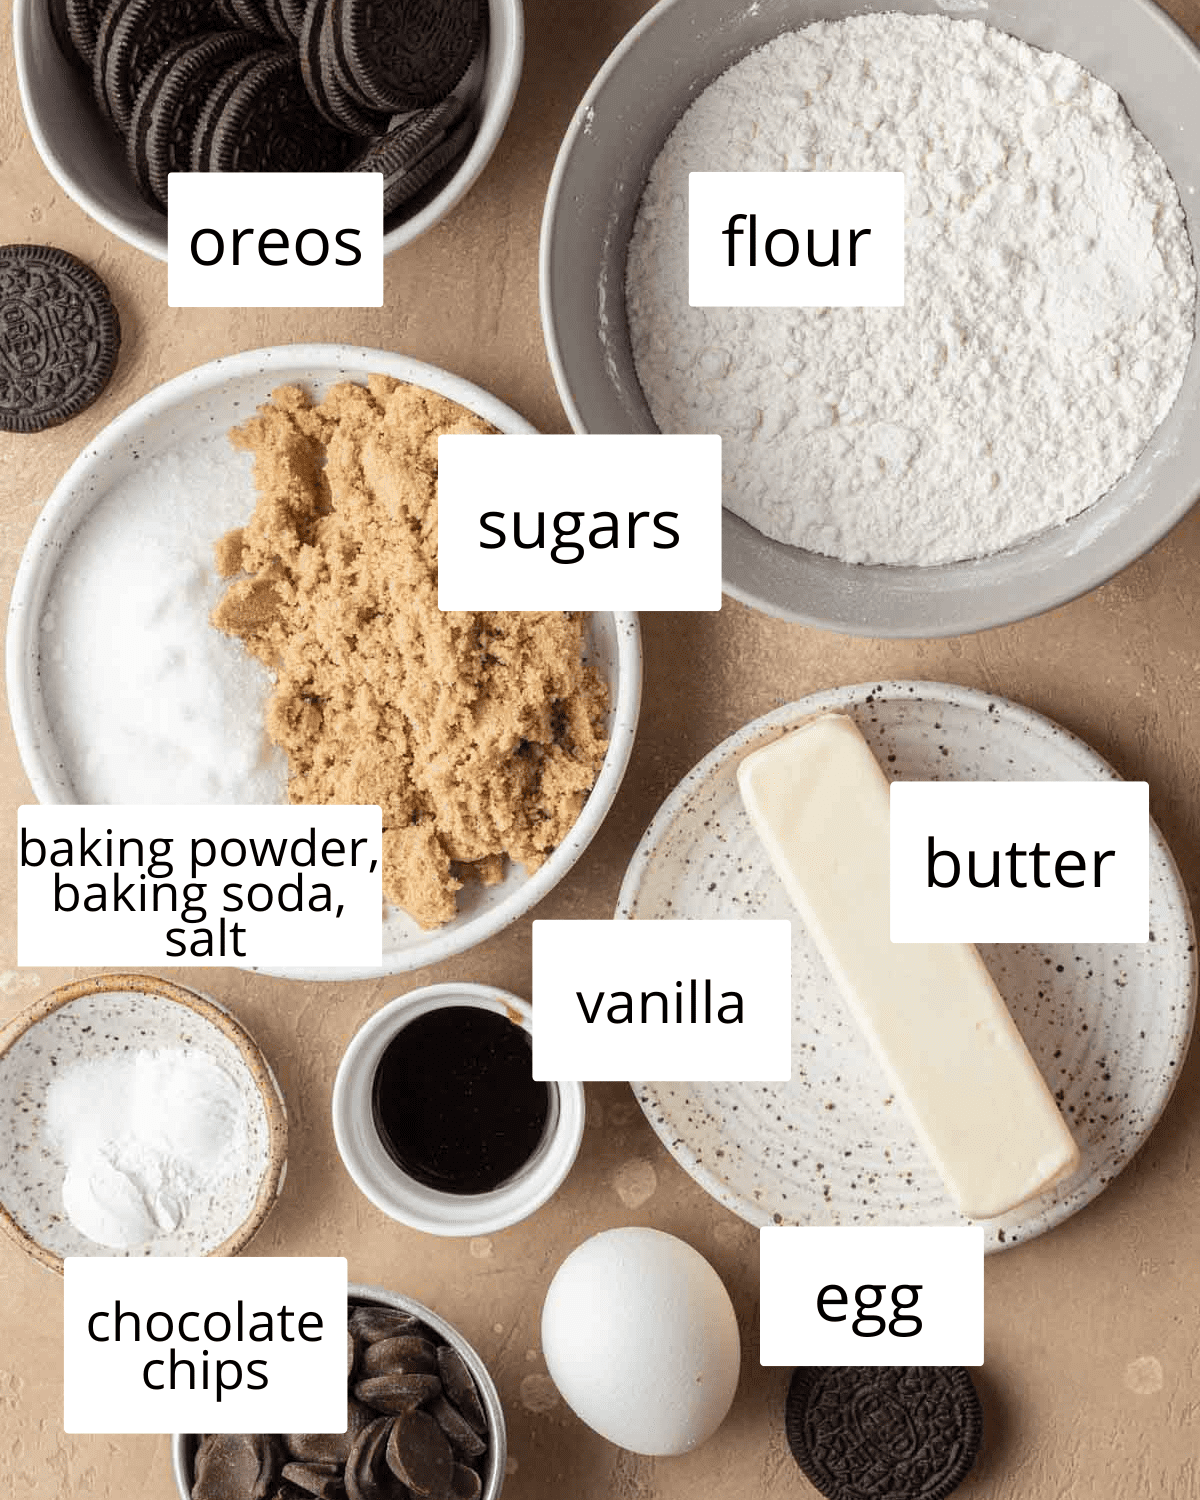 ingredients needed to make oreo chocolate chip cookies